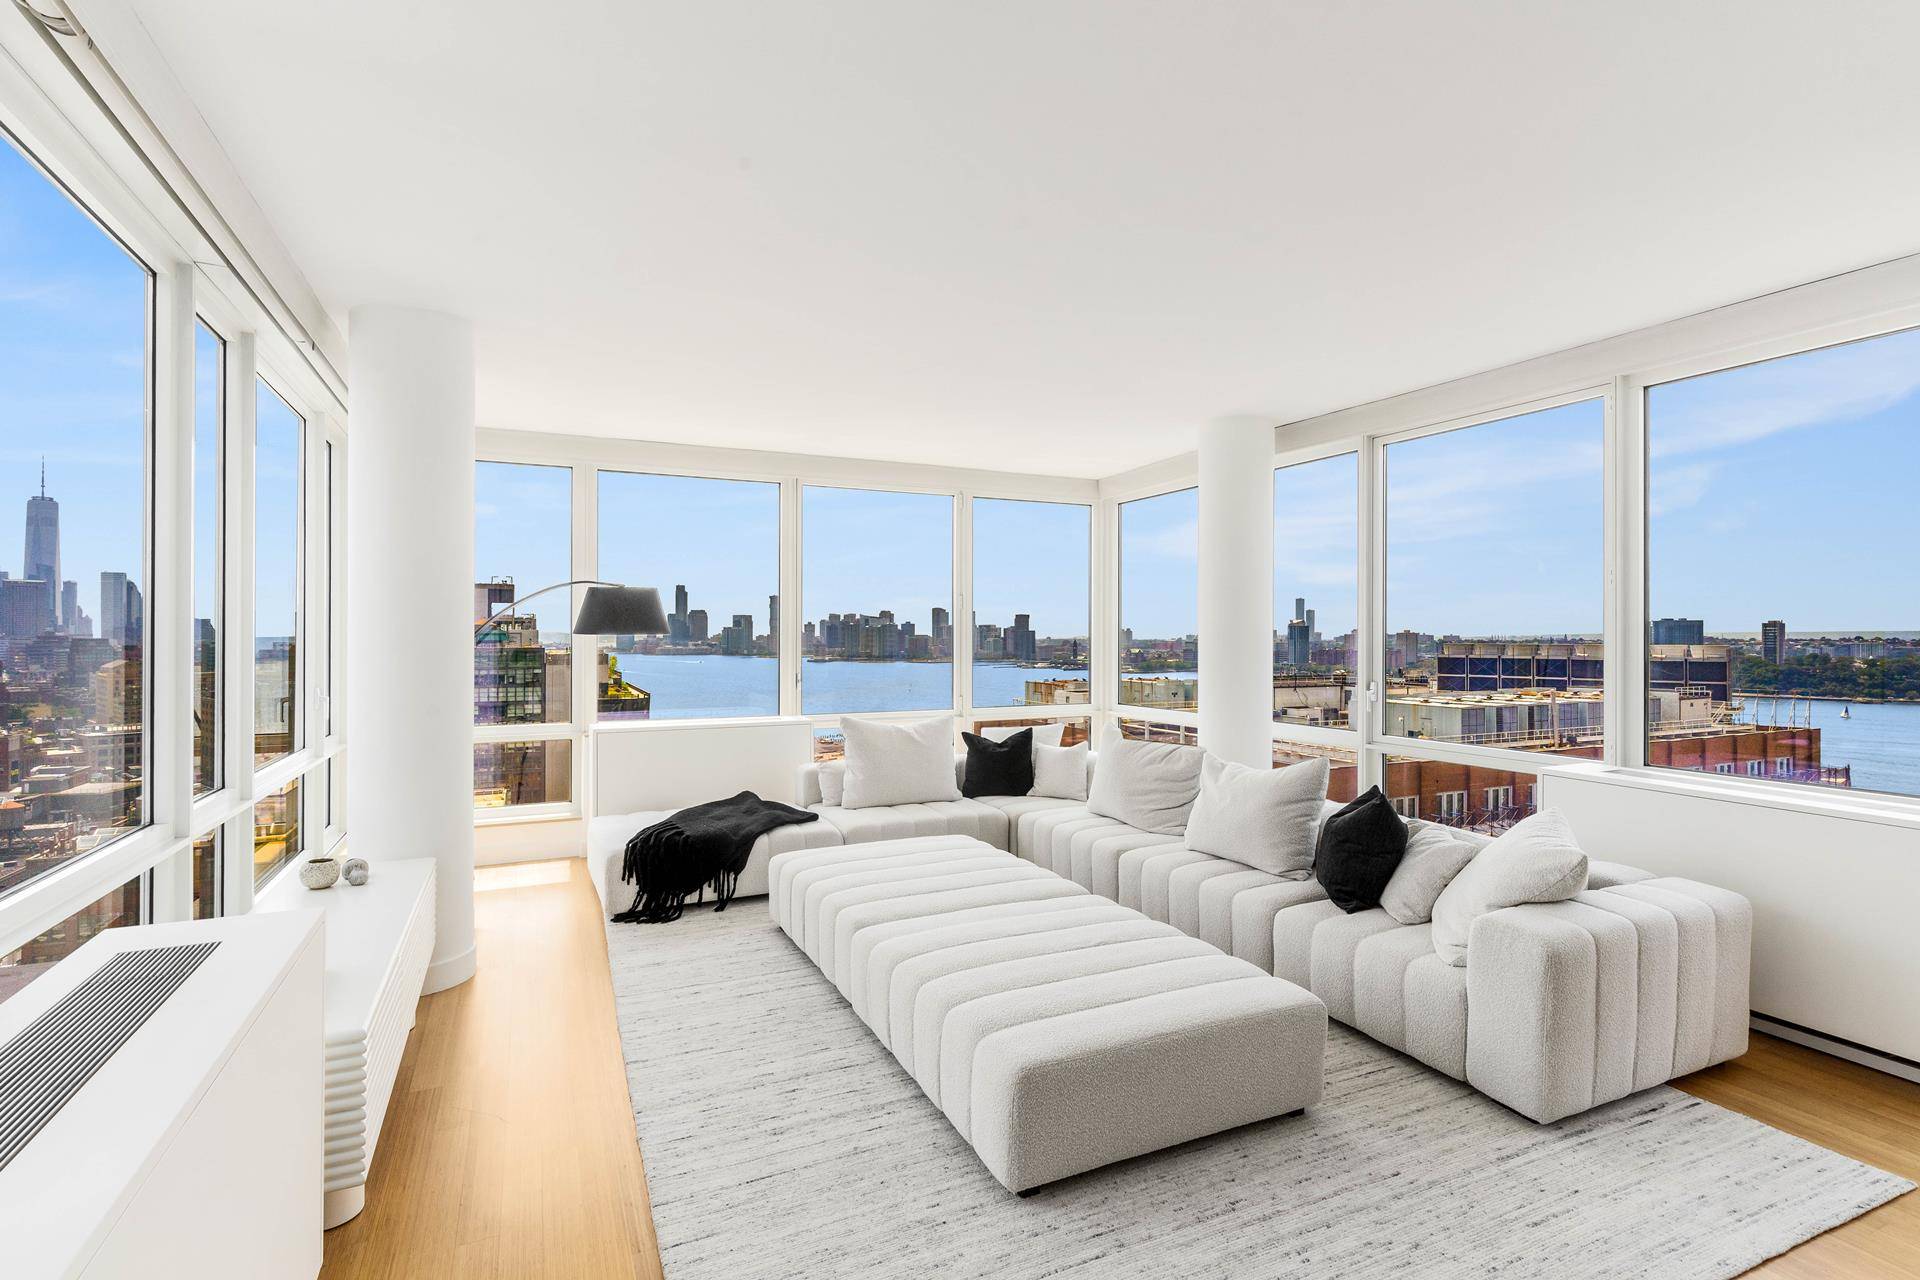 Enjoy incomparable, jaw dropping panoramic views and impeccably appointed living space perched high on the 23rd floor of the 24 story Caledonia, the premier West Chelsea luxury condominium built along ...